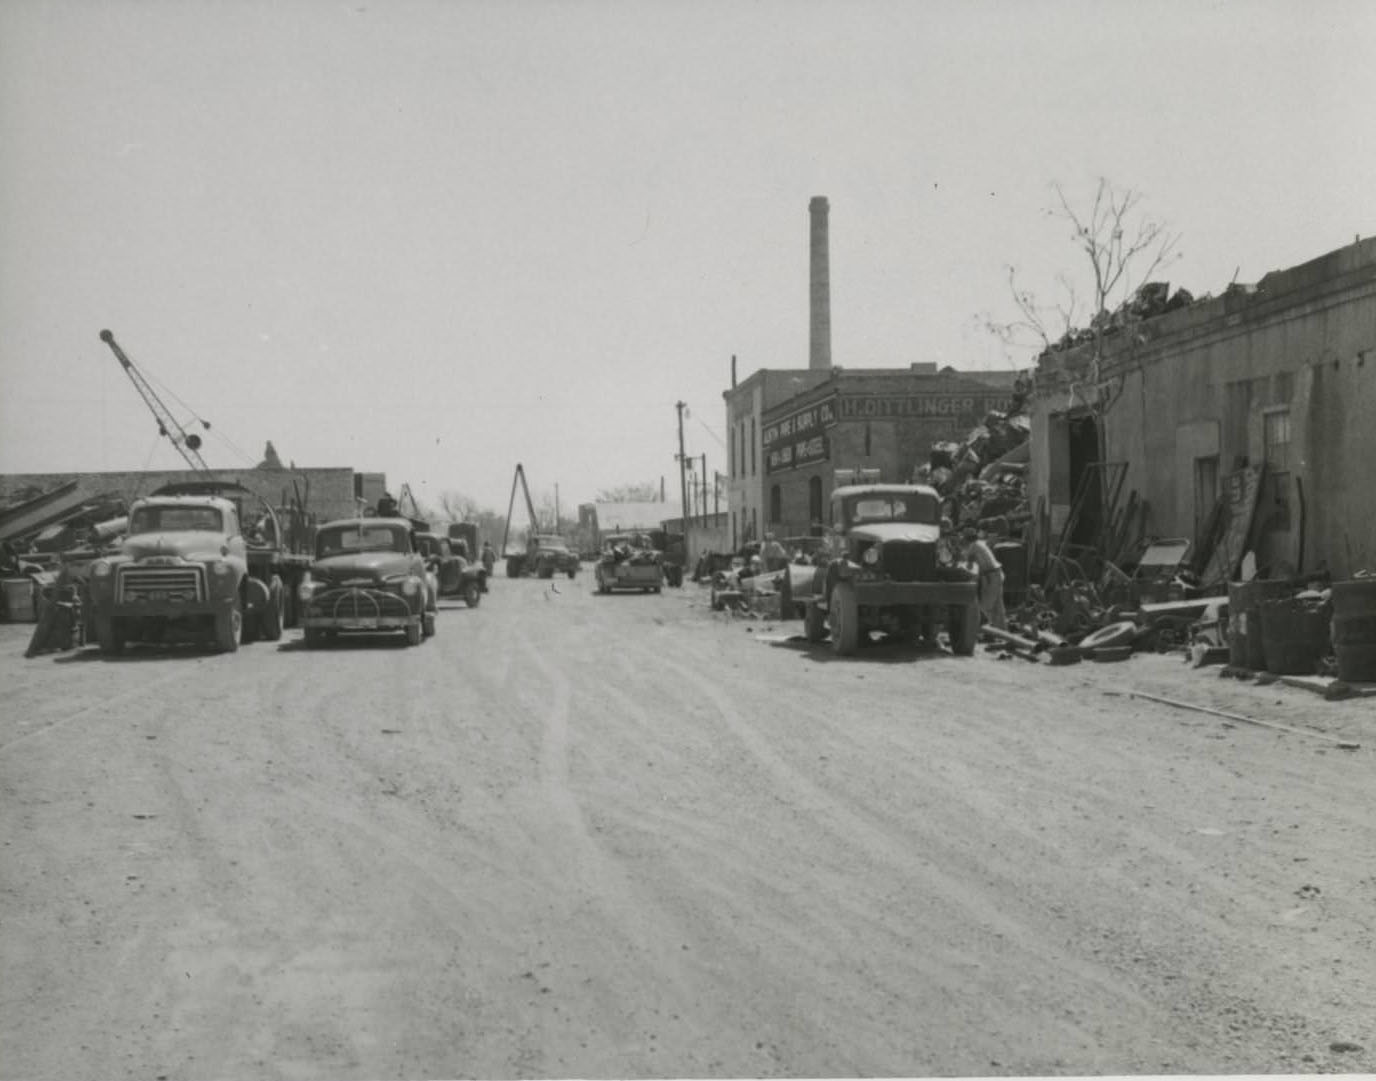 The 800 blocks of E. 4th Street looking east. Austin Pipe & Supply Co. is on the south side of the street, 1959